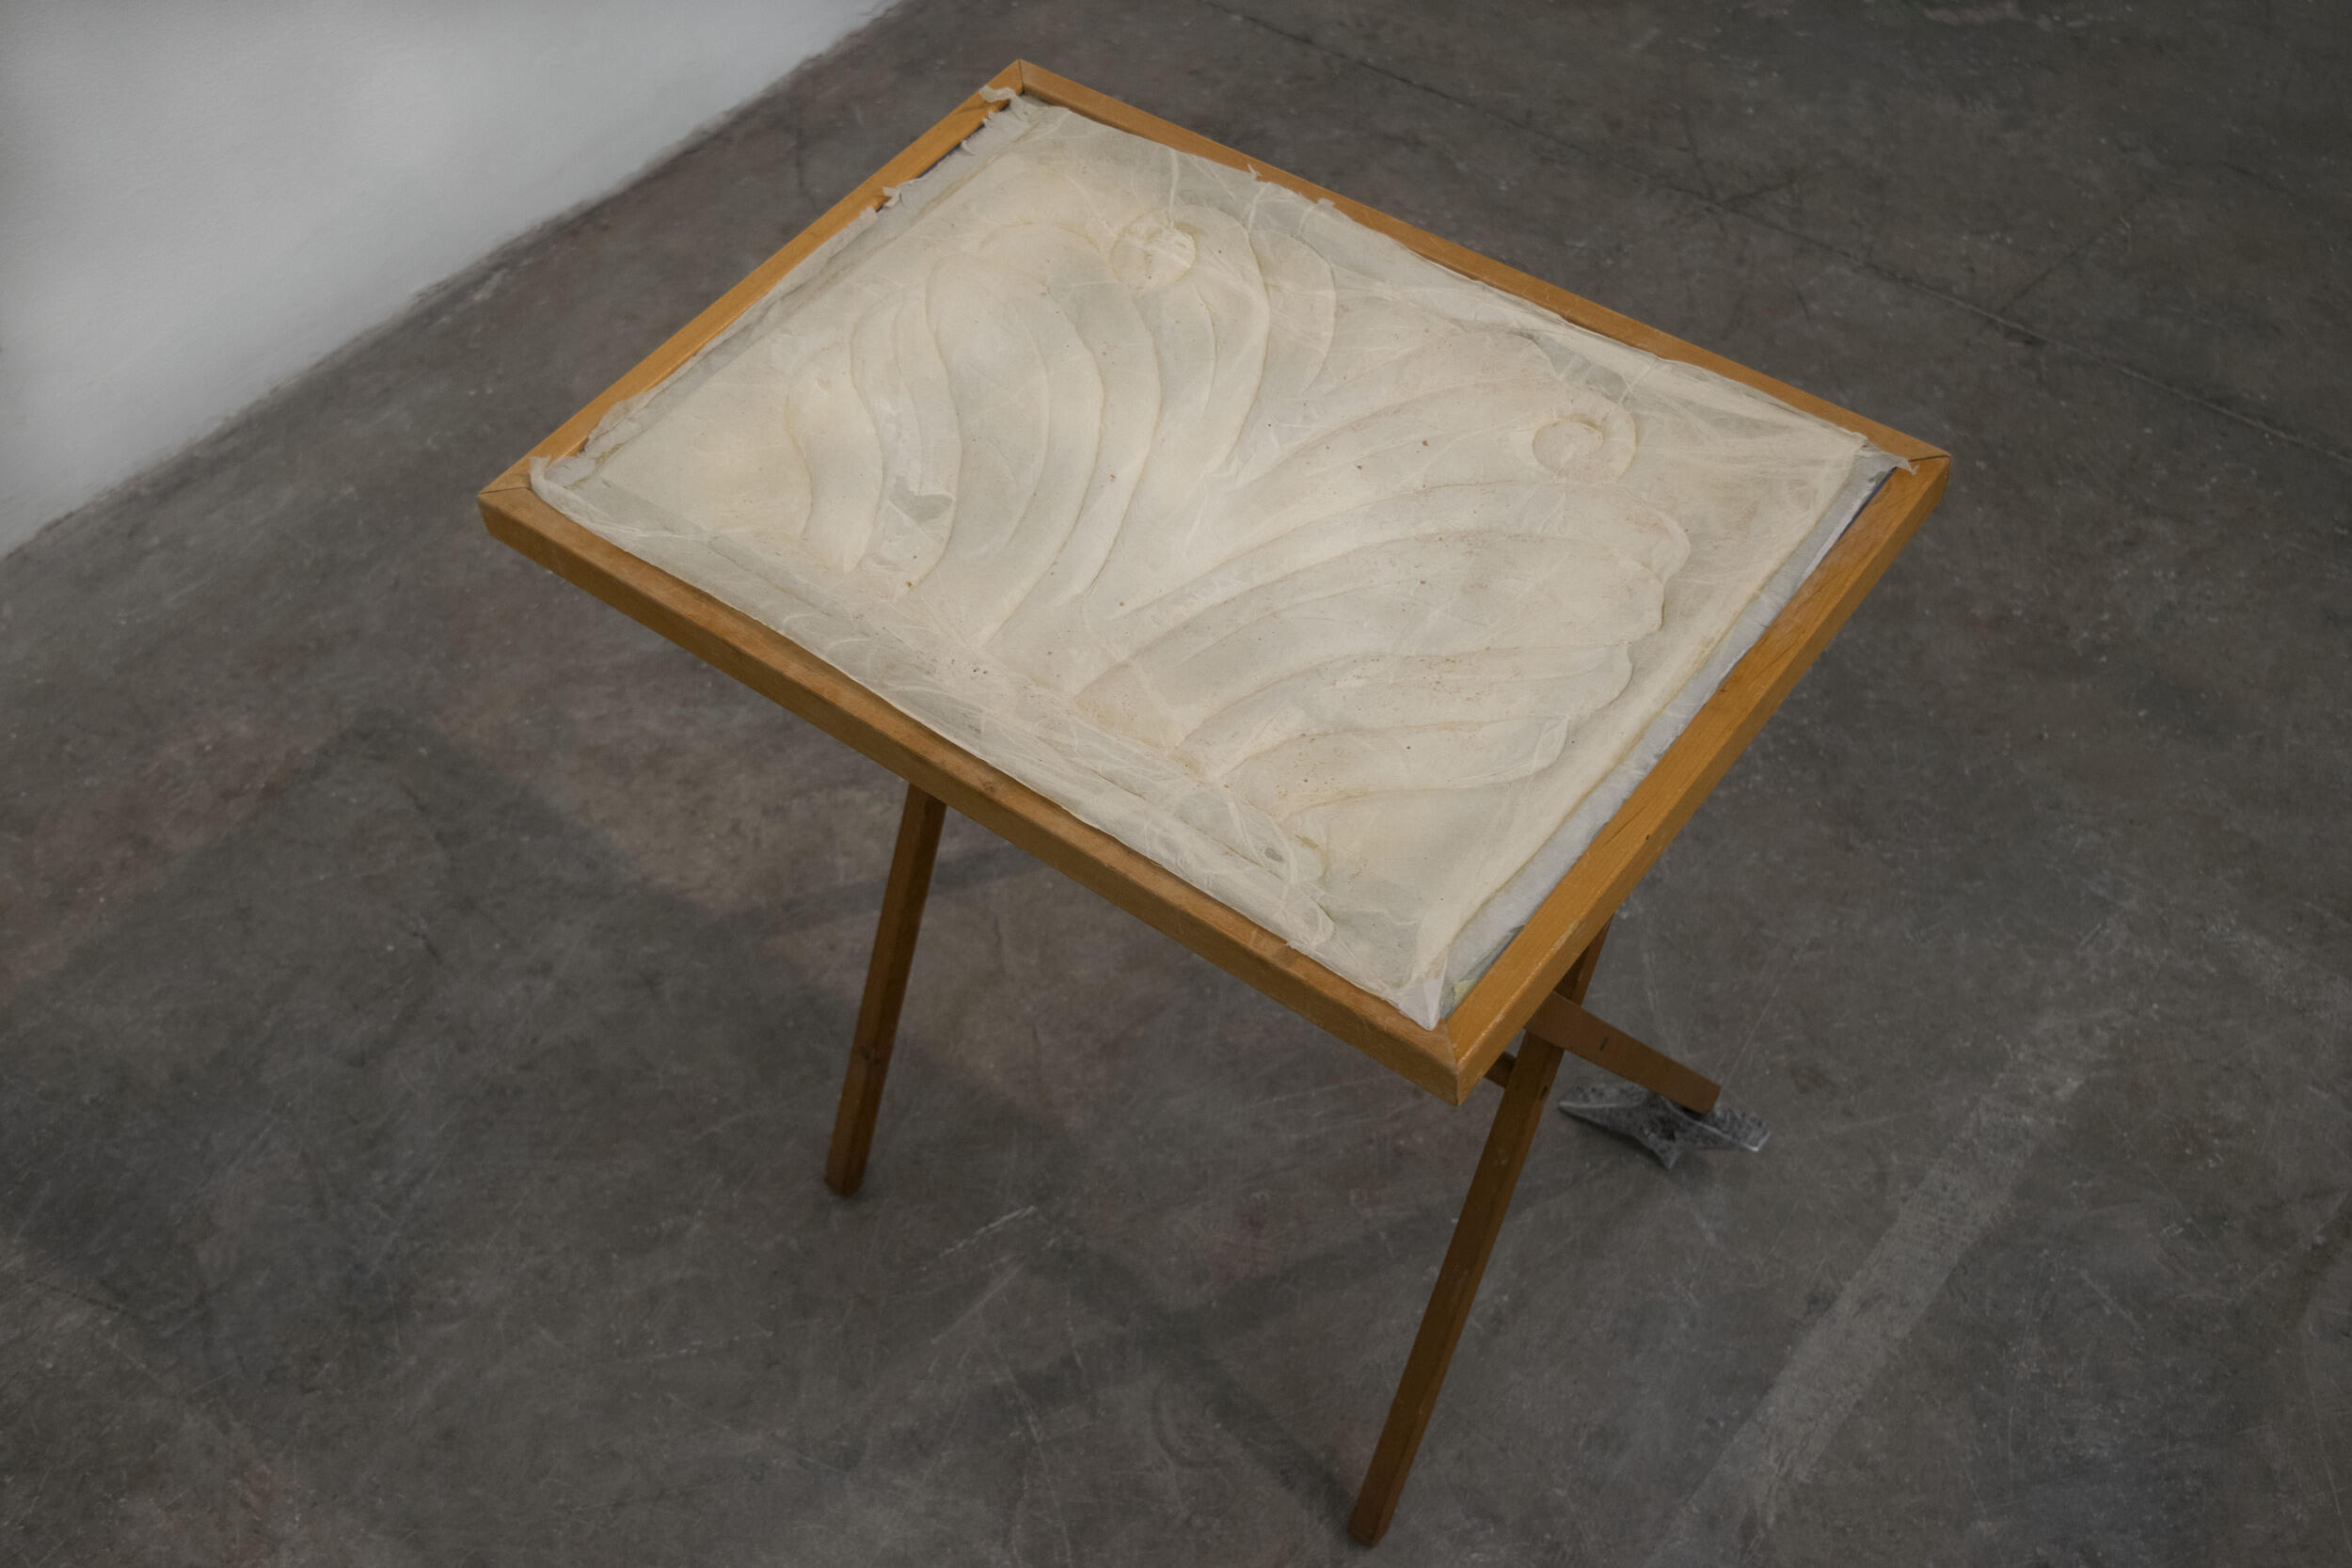 An image of a table with something cream covering the top